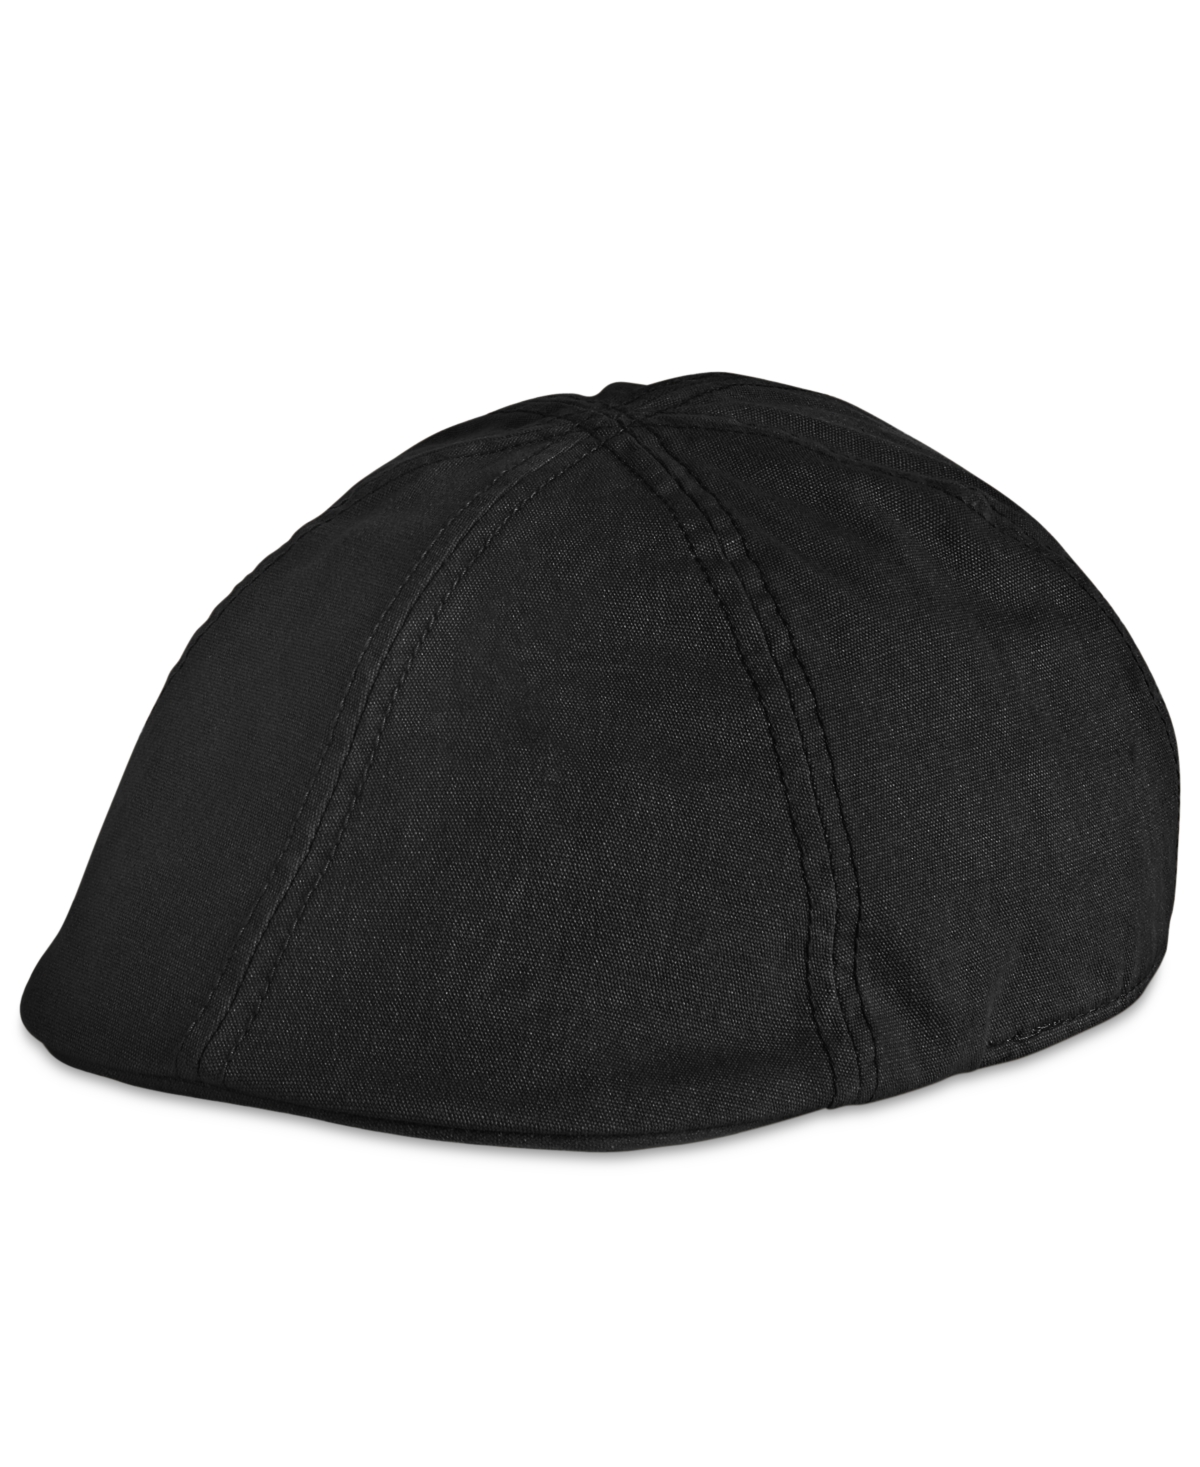 Men's Oil Cloth Classic Ivy Hat with Flannel Band - Black